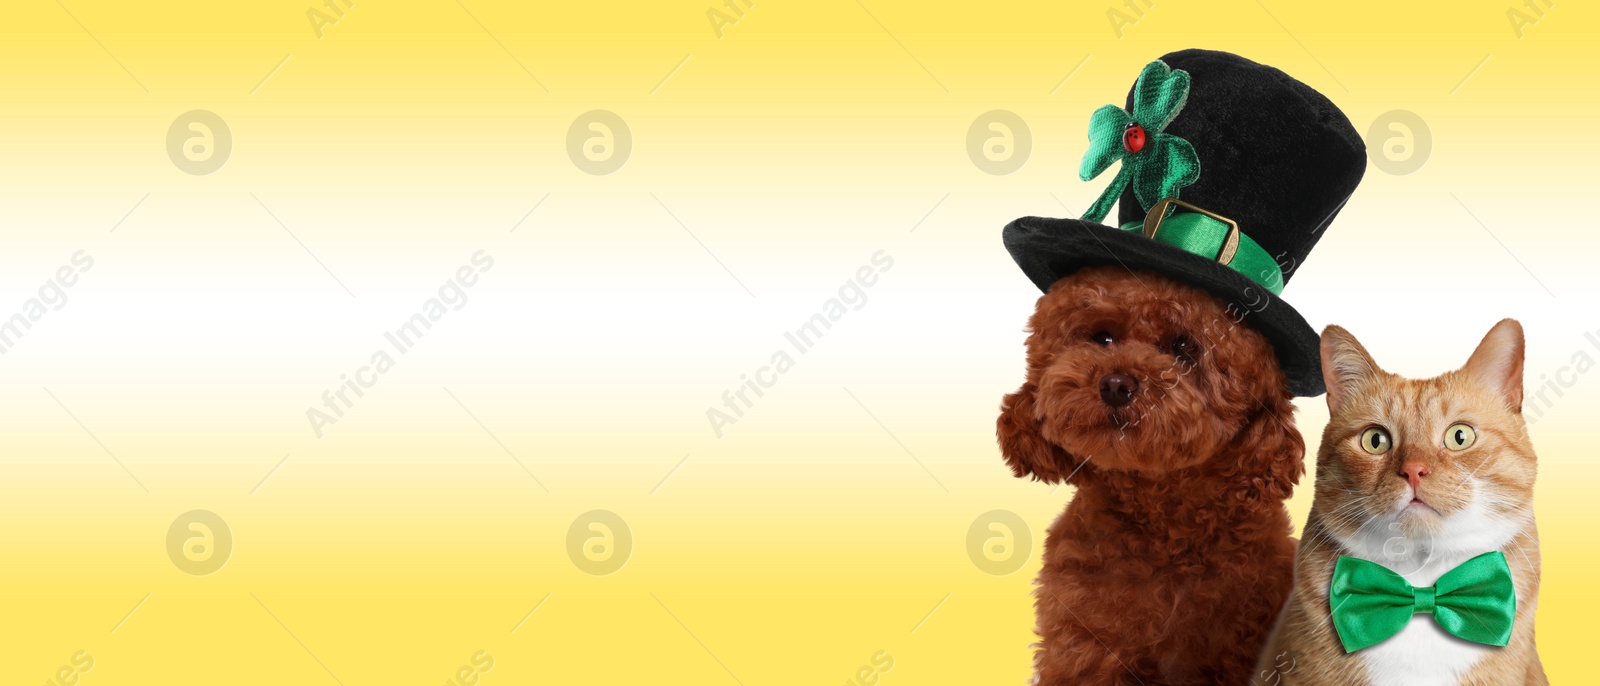 Image of St. Patrick's day celebration. Cute dog in leprechaun hat and cat with green bow tie on yellow background. Banner design with space for text